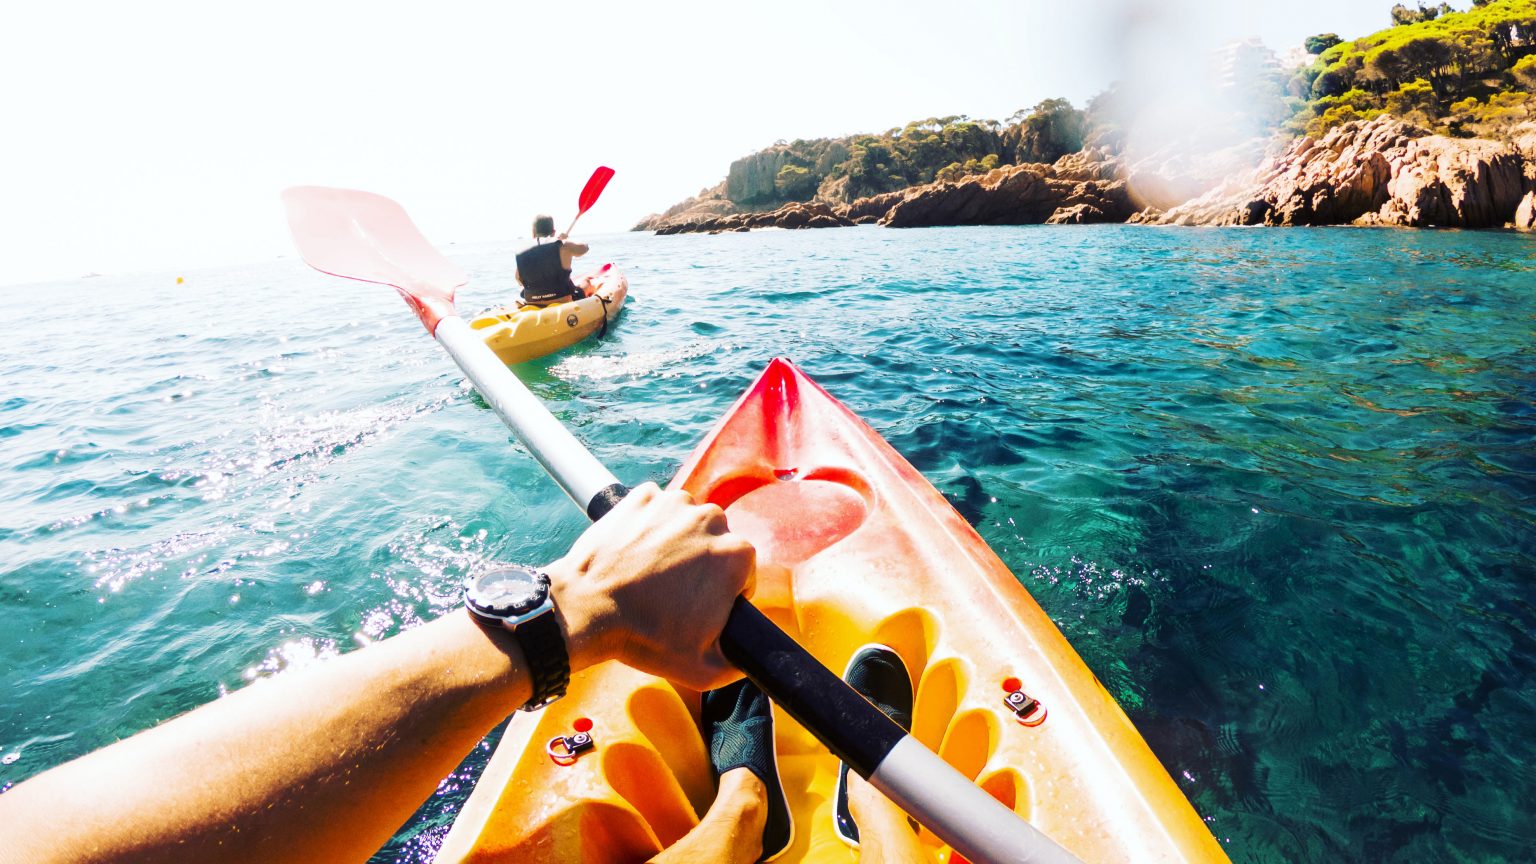 The best sea kayaks: for touring and exploring coastlines, islands and inlets